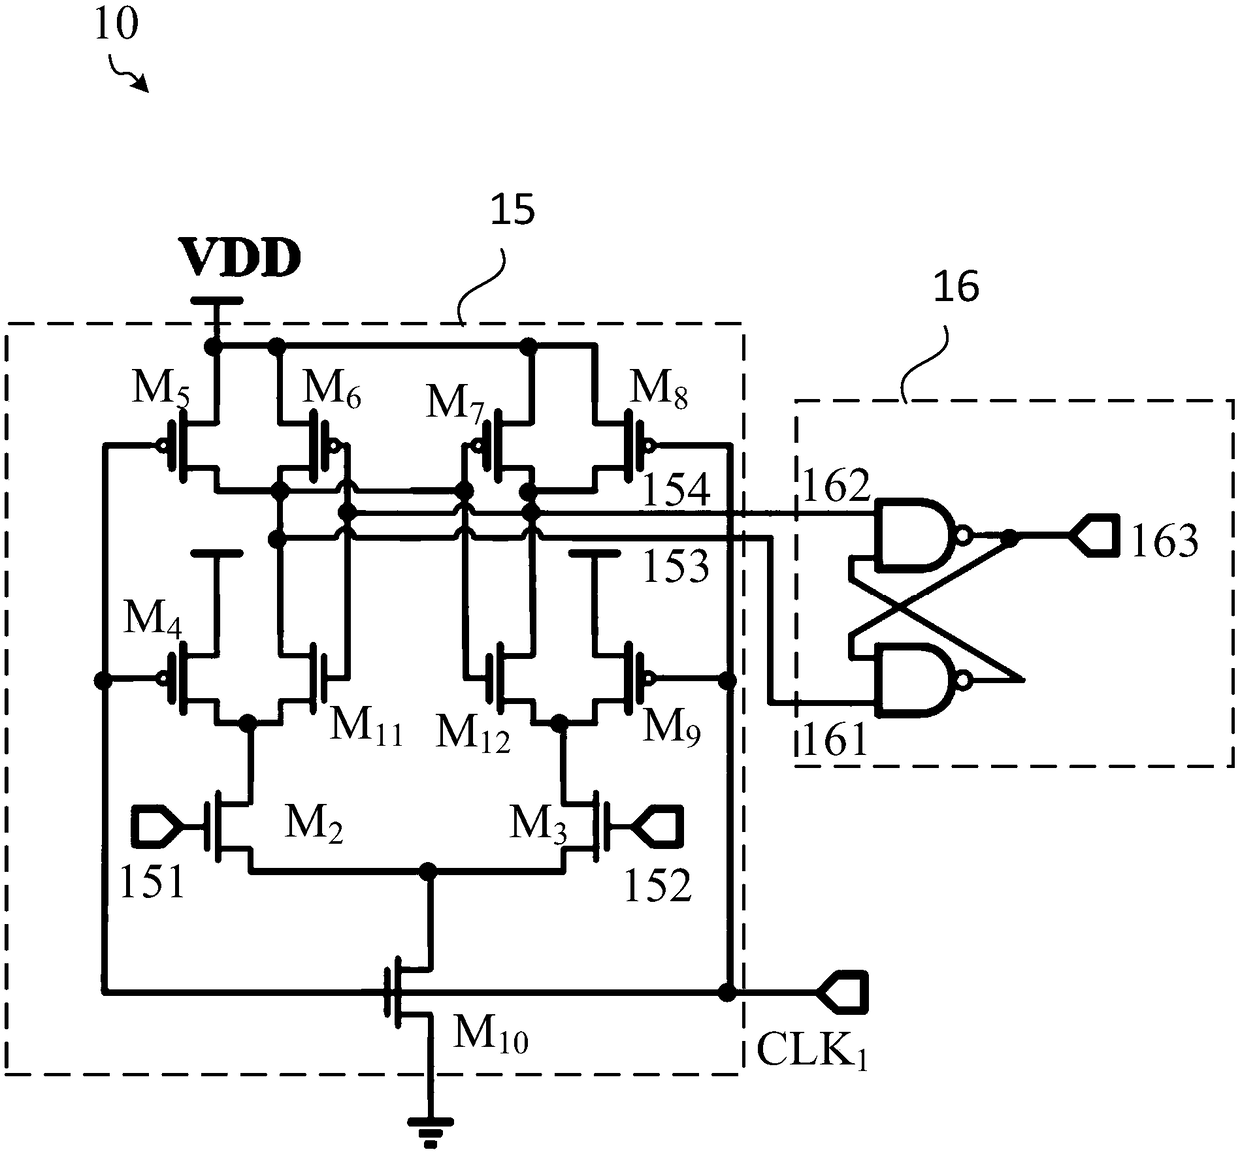 Pseudo digital low-pressure-difference linear voltage stabilizer and power management chip